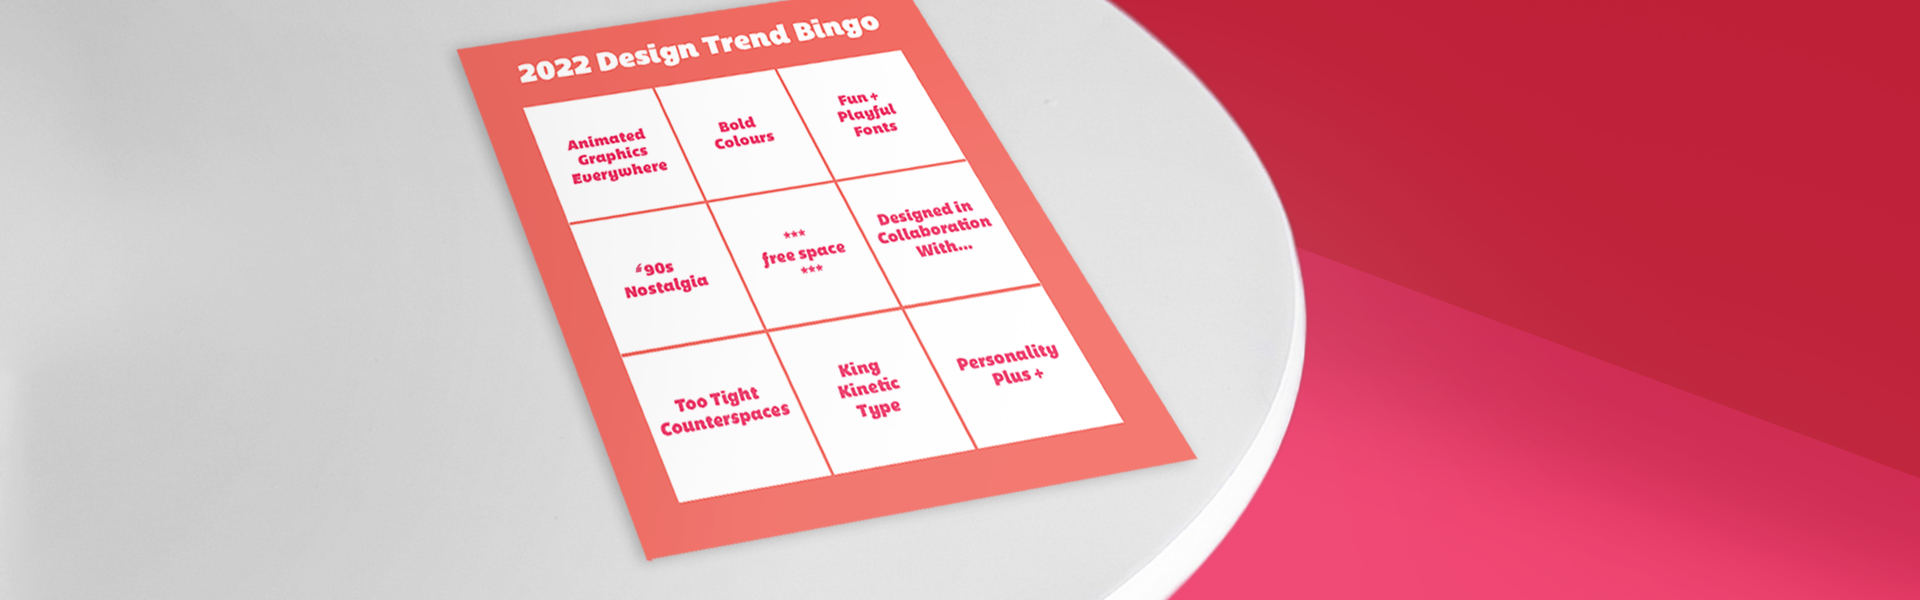 Design bingo card on white table against pink and red background